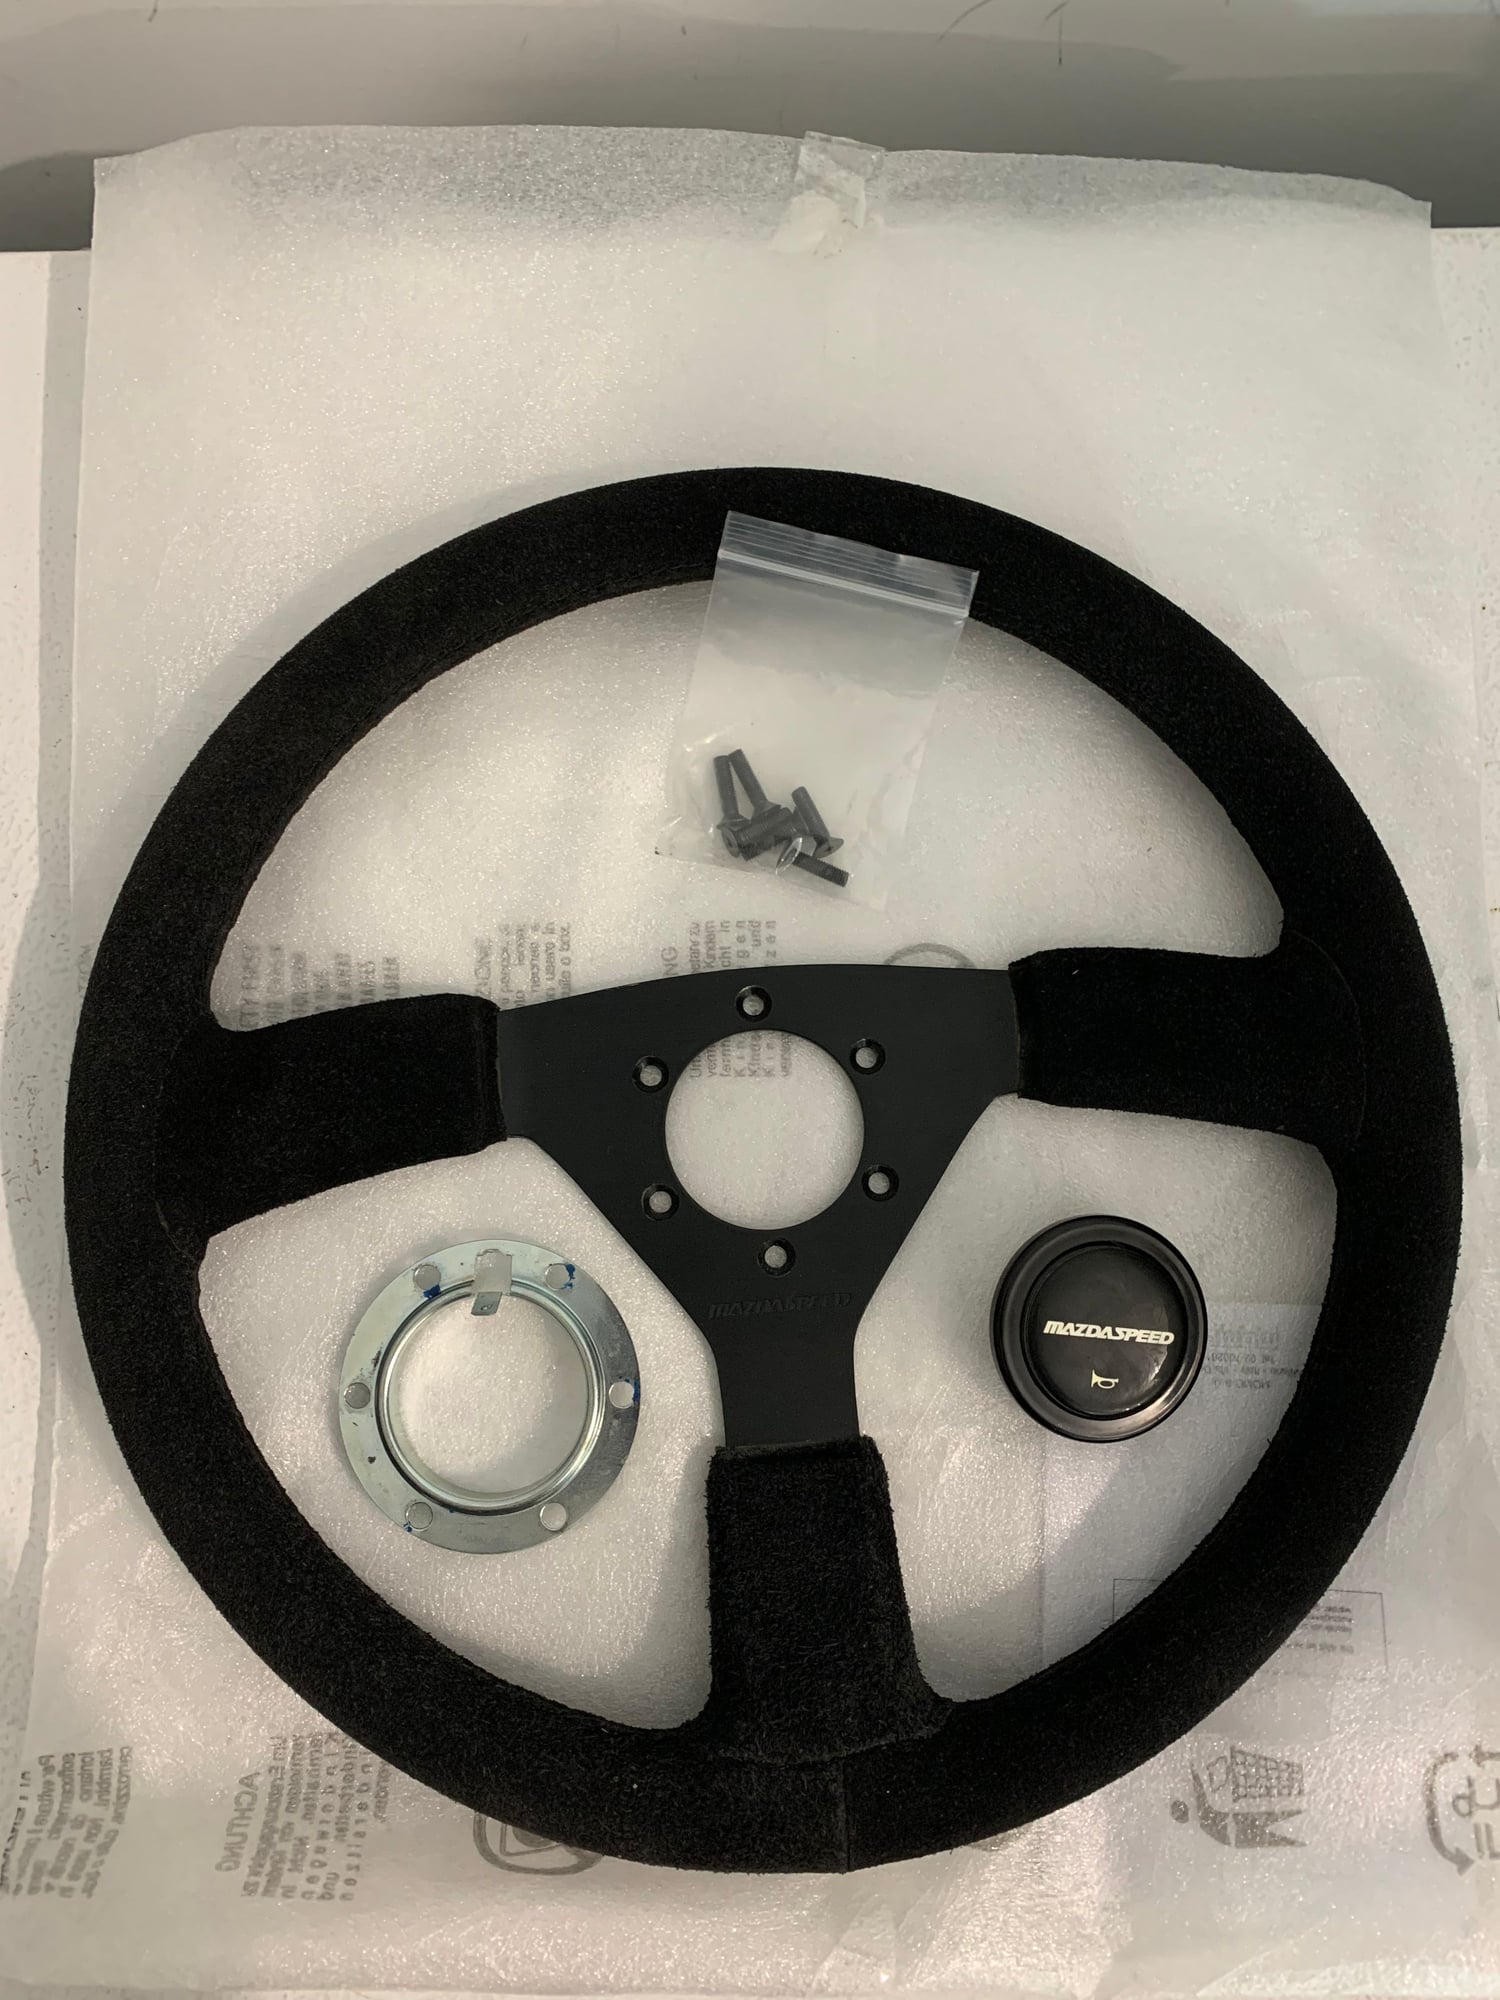 Accessories - Mazdaspeed Steering Wheel and Horn Button - Used - 1993 to 2002 Mazda RX-7 - Allentown, PA 18031, United States